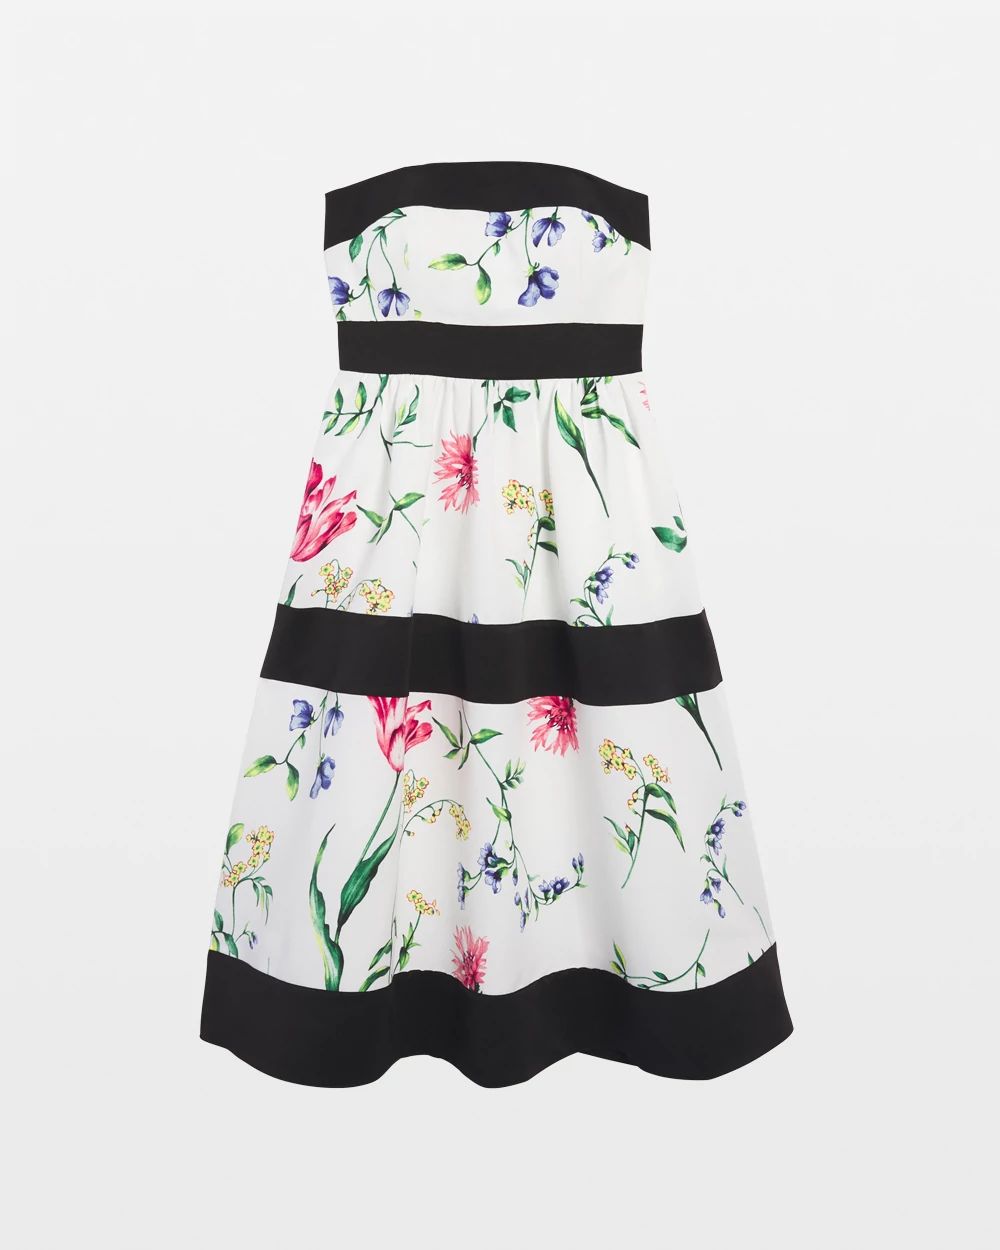 Petite Strapless Floral Contrast Fit & Flare Dress click to view larger image.